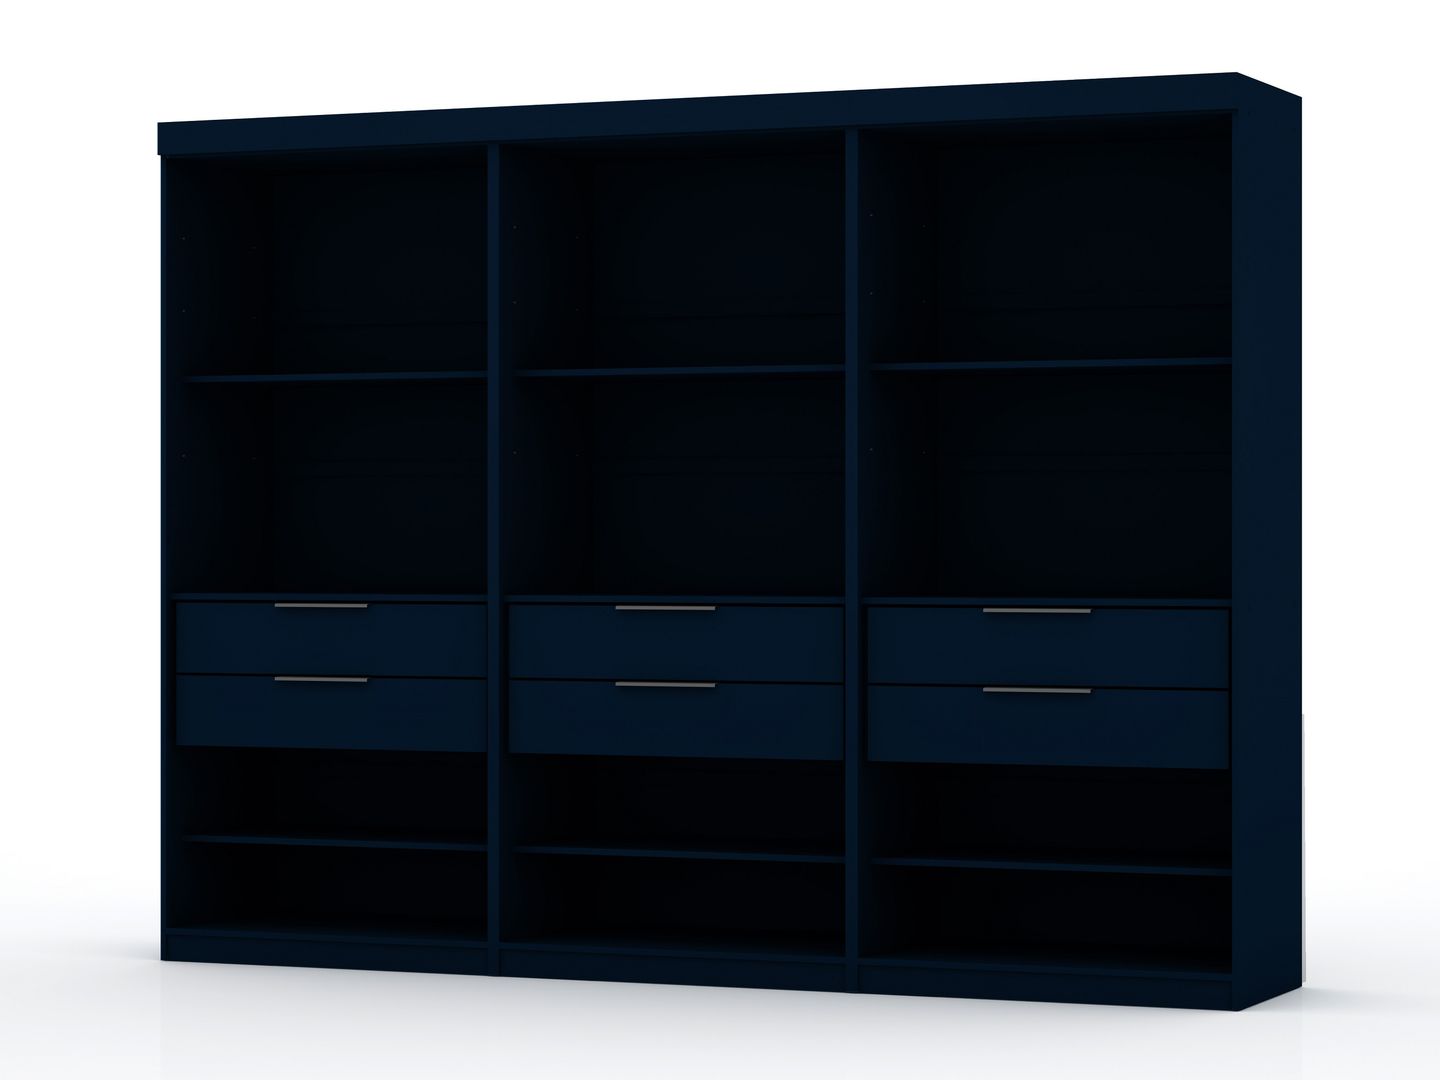 Manhattan Comfort Mulberry Open 3 Sectional Modem Wardrobe Closet with 6 Drawers - Set of 3 in Tatiana Midnight BlueManhattan Comfort-Armoires and Wardrobes - - 1